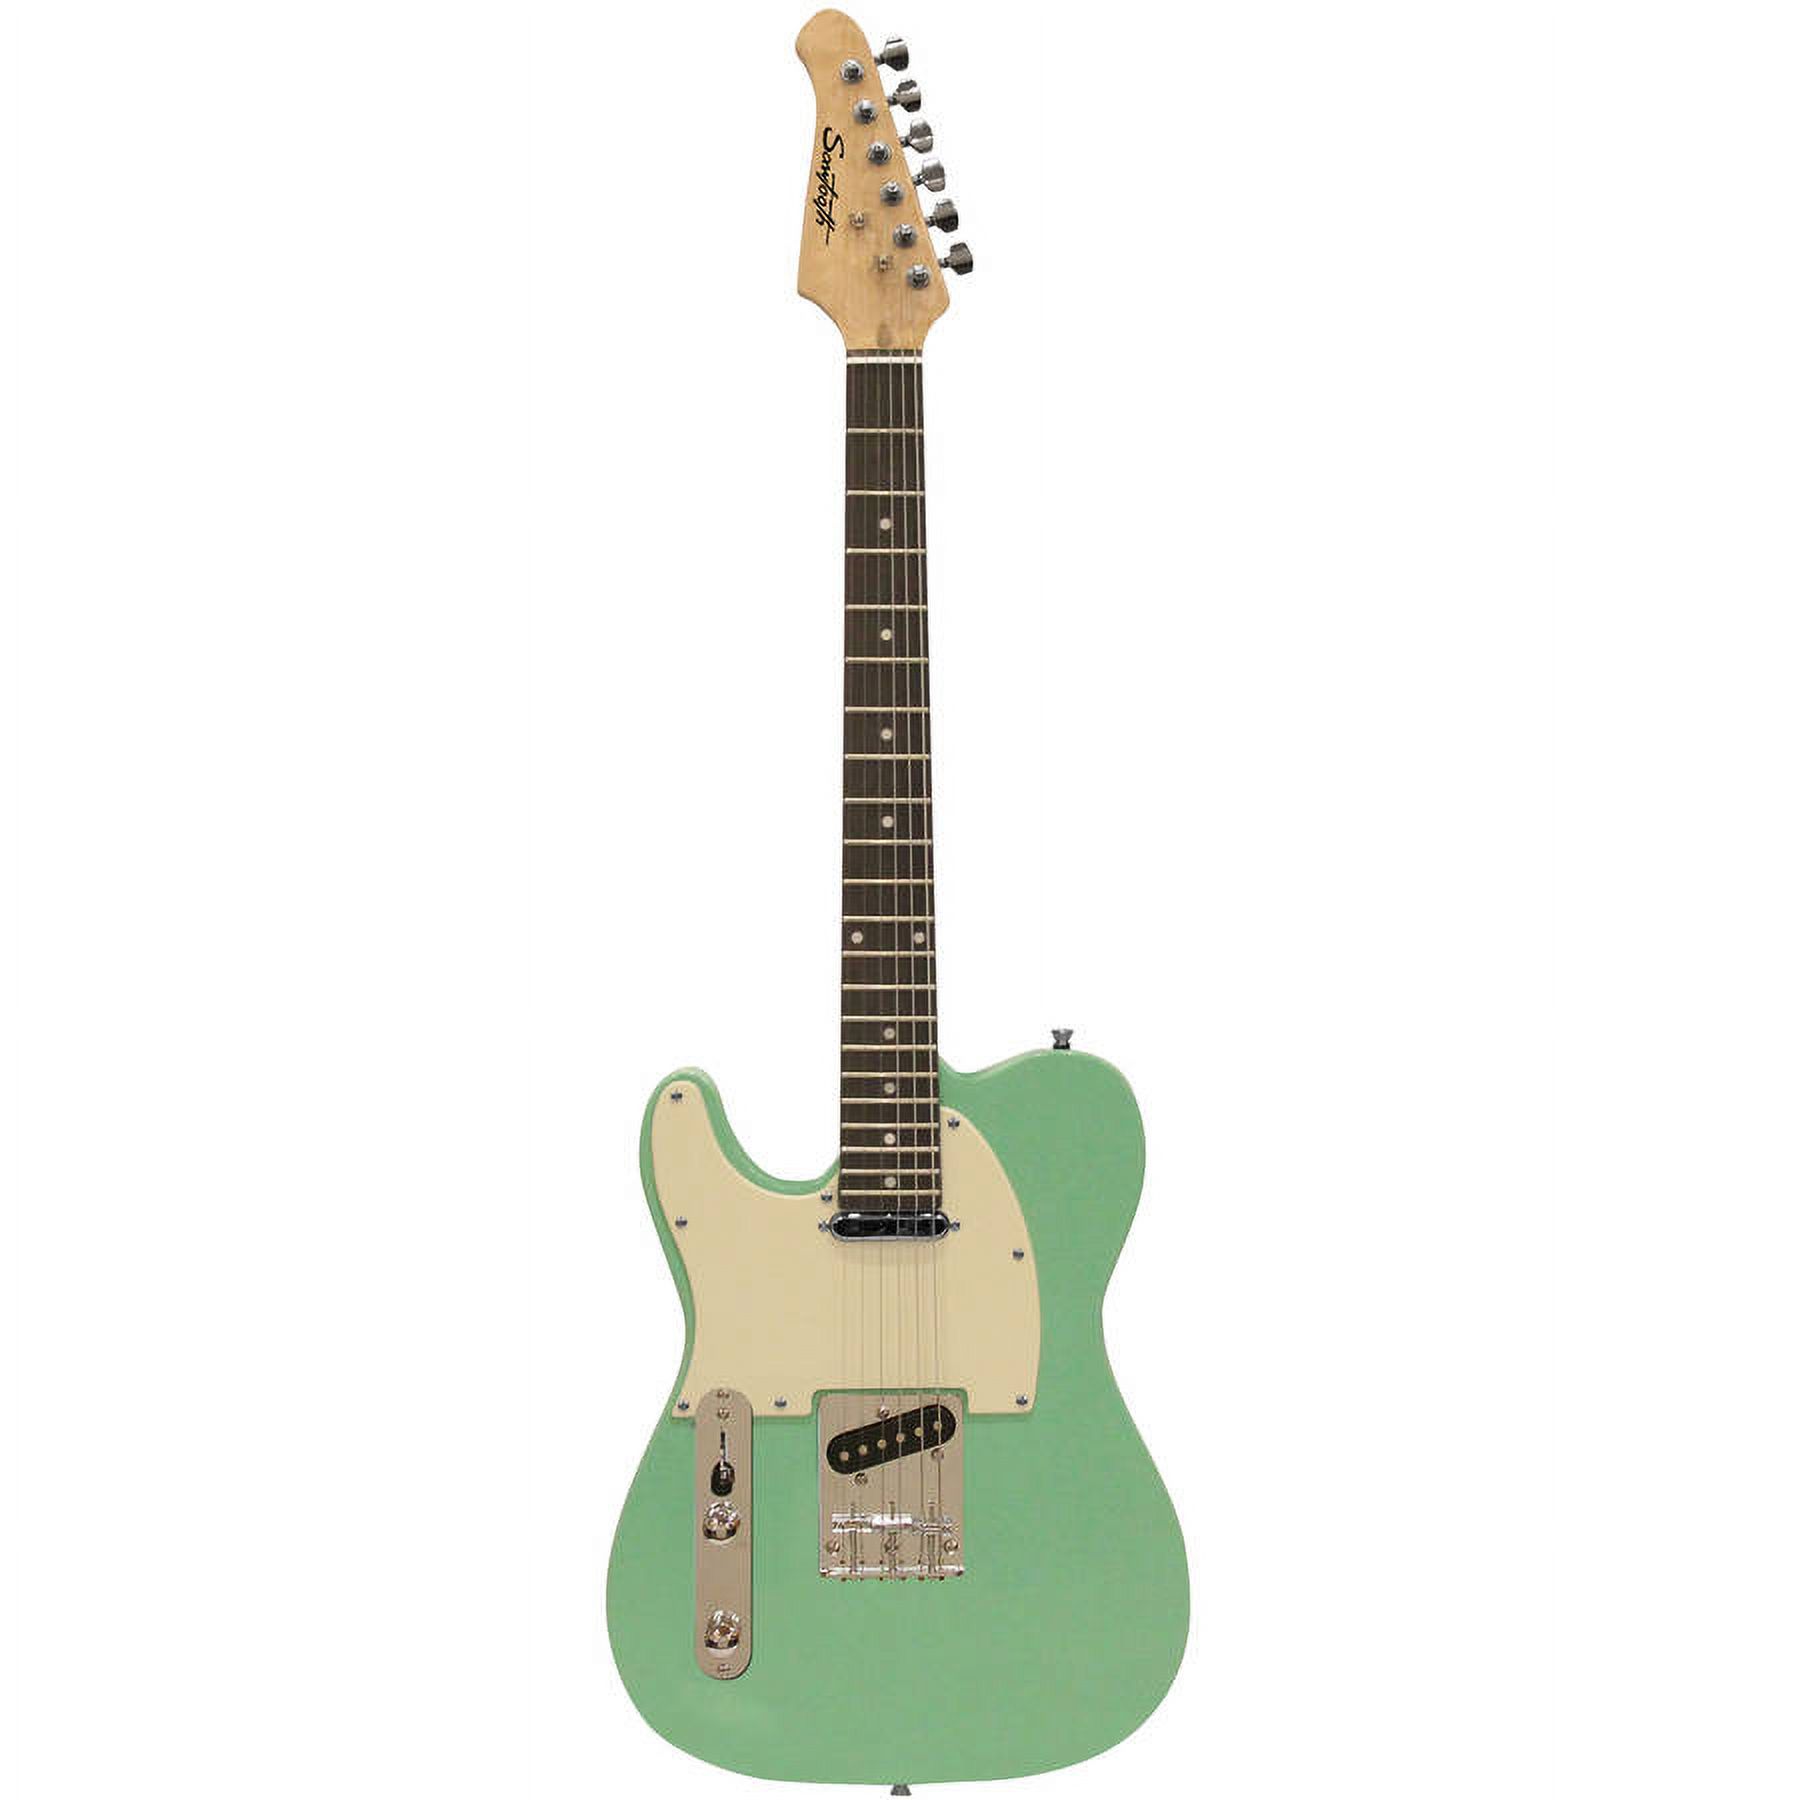 Sawtooth ET Series Left Handed Electric Guitar Kit with Sawtooth Amp and  ChromaCast Accessories, Surf Green with Aged White Pickguard